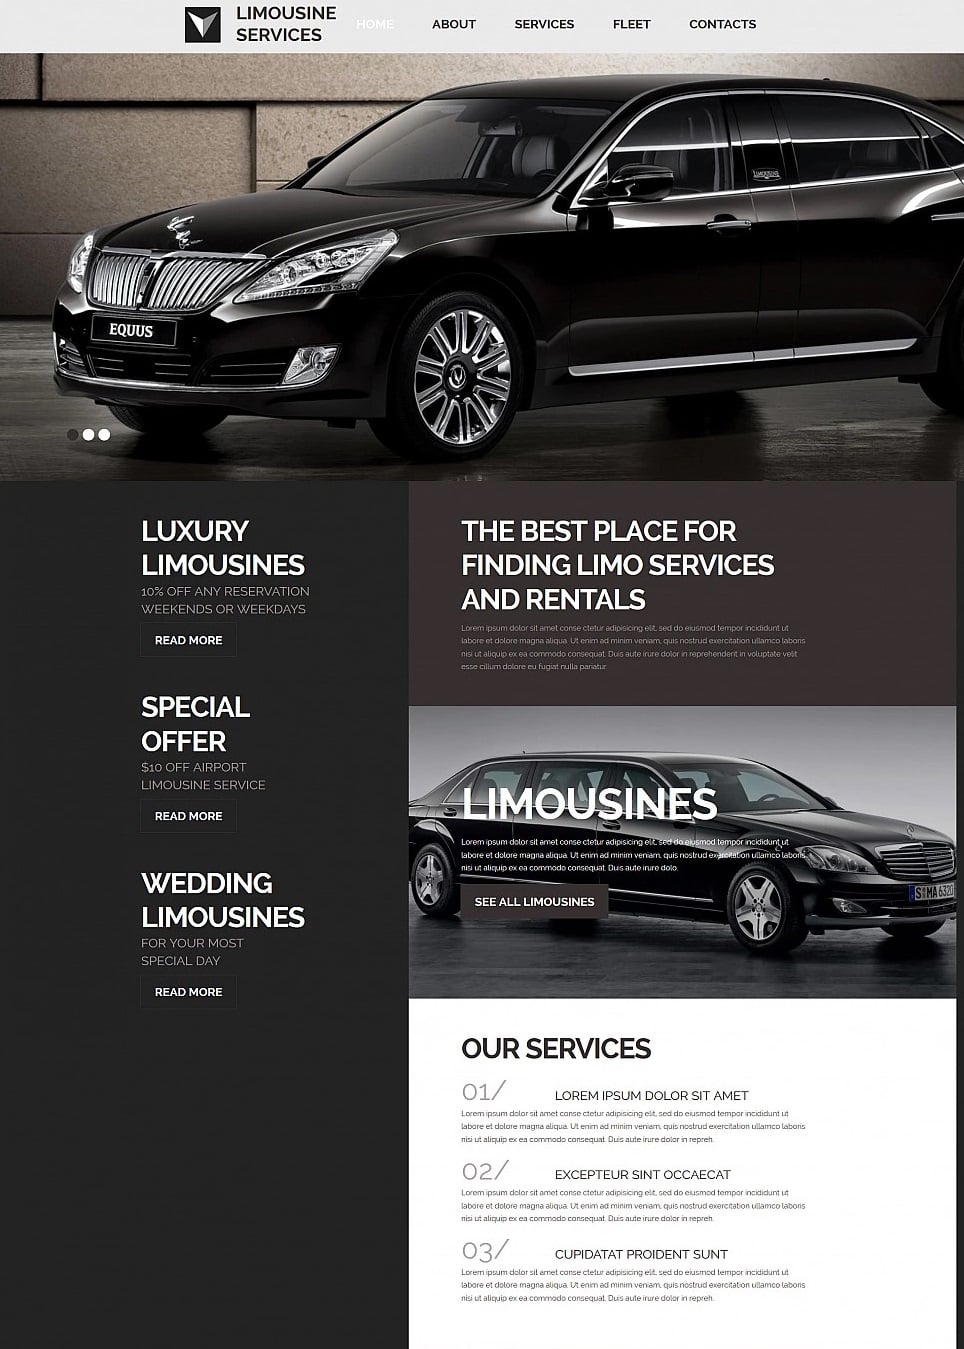 How to make a rent a car website - limousine services template